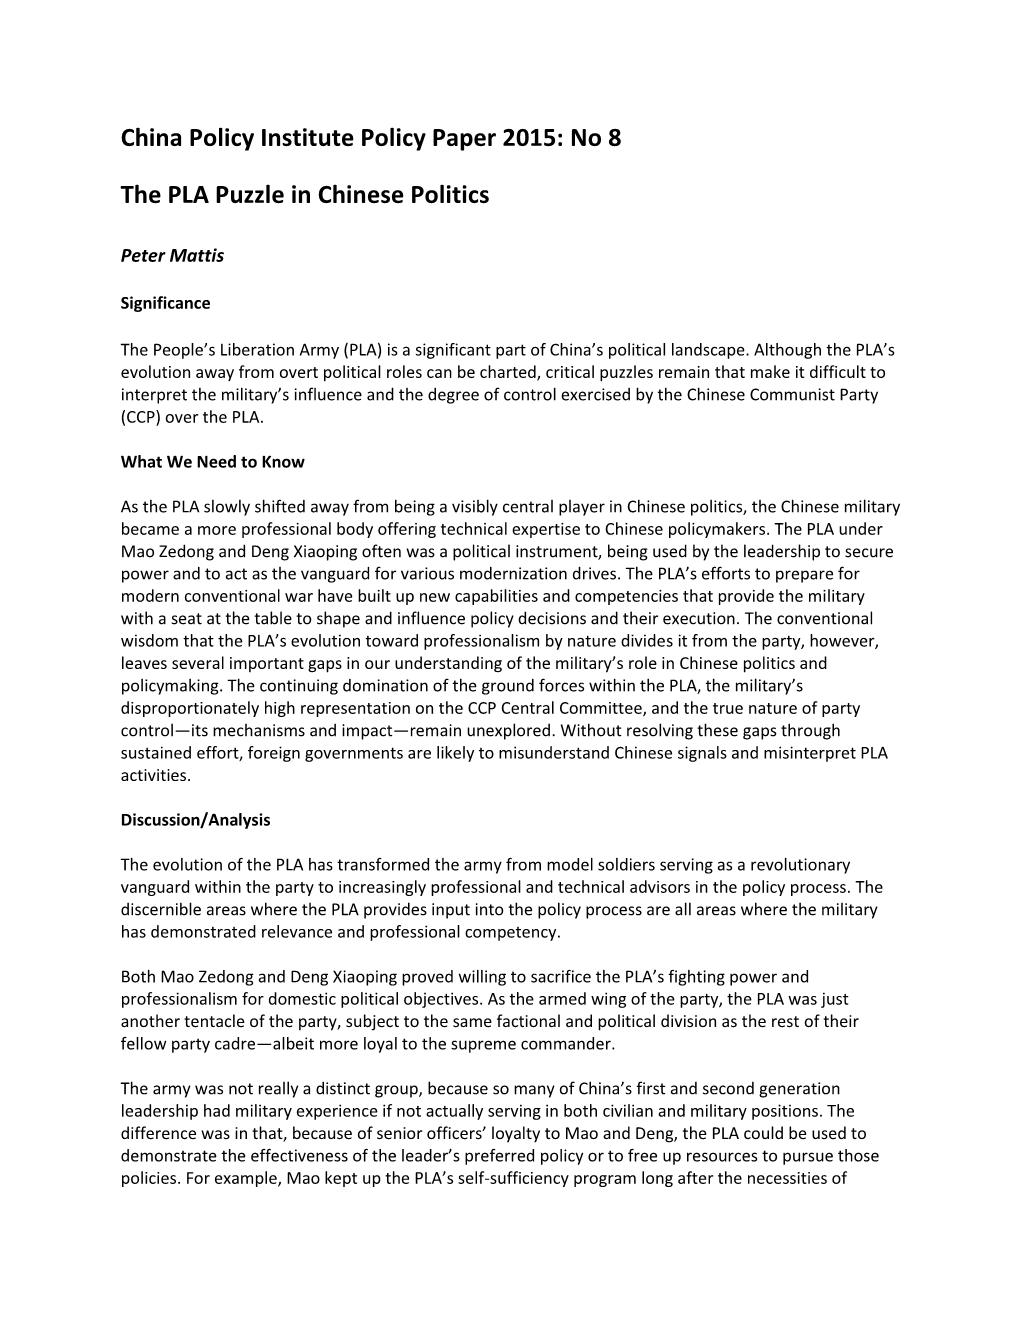 China Policy Institute Policy Paper 2015: No 8 the PLA Puzzle in Chinese Politics